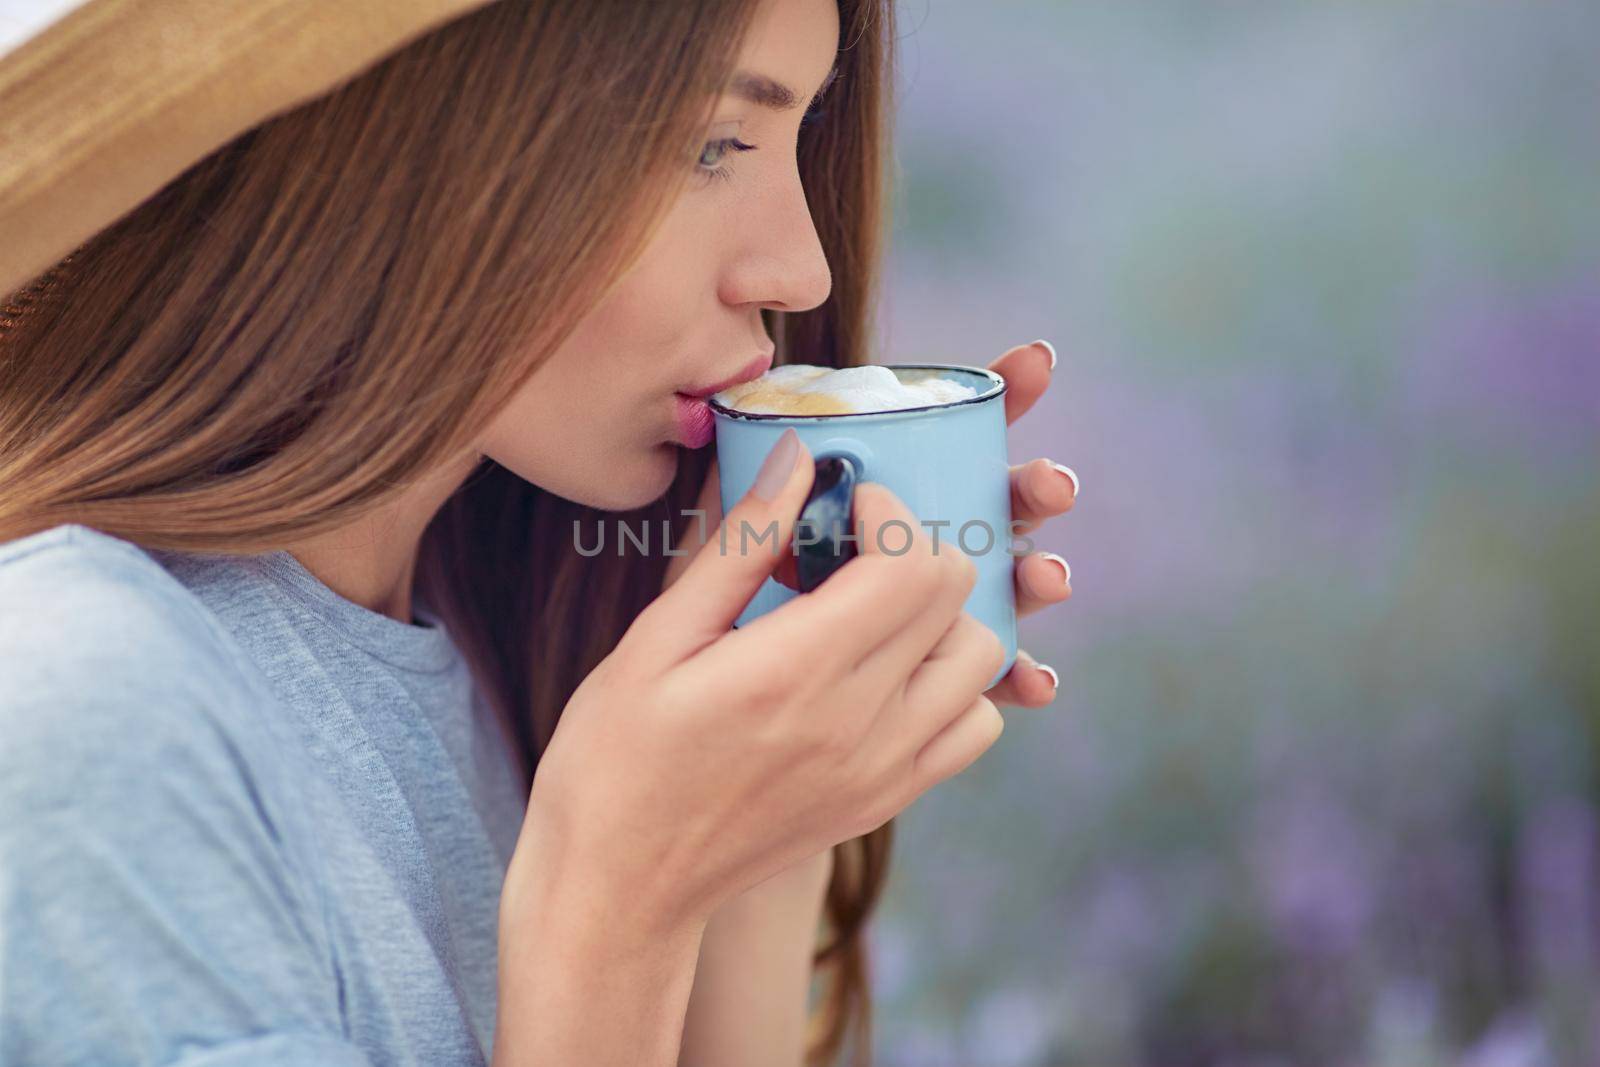 Side close up view of young girl wearing straw hat enjoying hot drink outdoors. Stunning woman drinking coffee with foam, posing in lavender field. Concept of beauty, nature, drink.